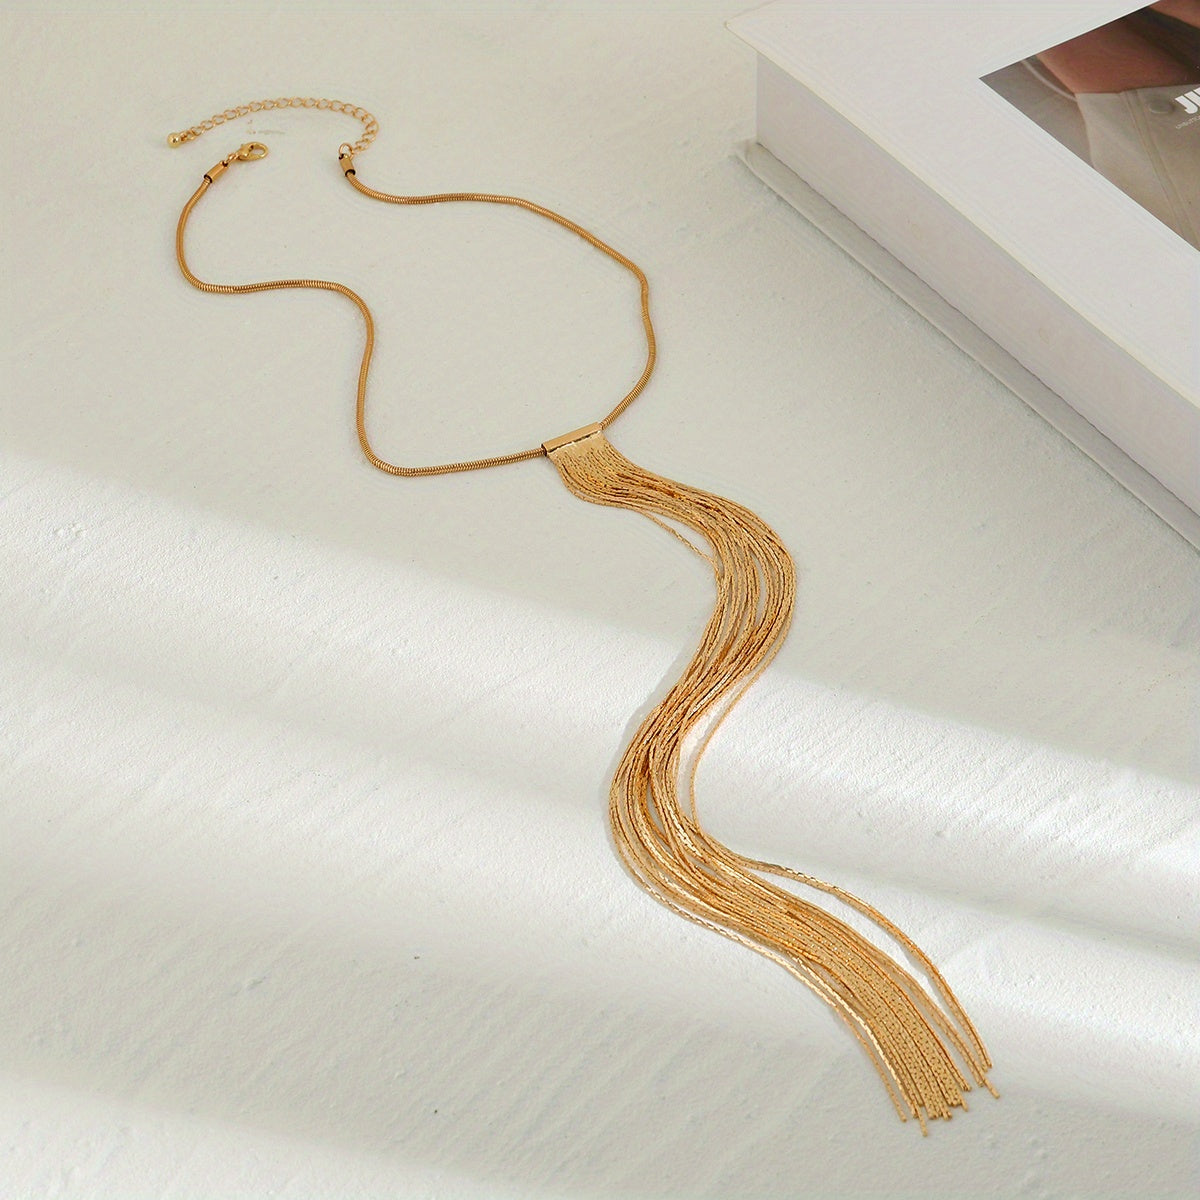 Gorgeous Vintage Snake Bone Golden Chain Long Tassel Clavicle Necklace - Sexy & Stylish!